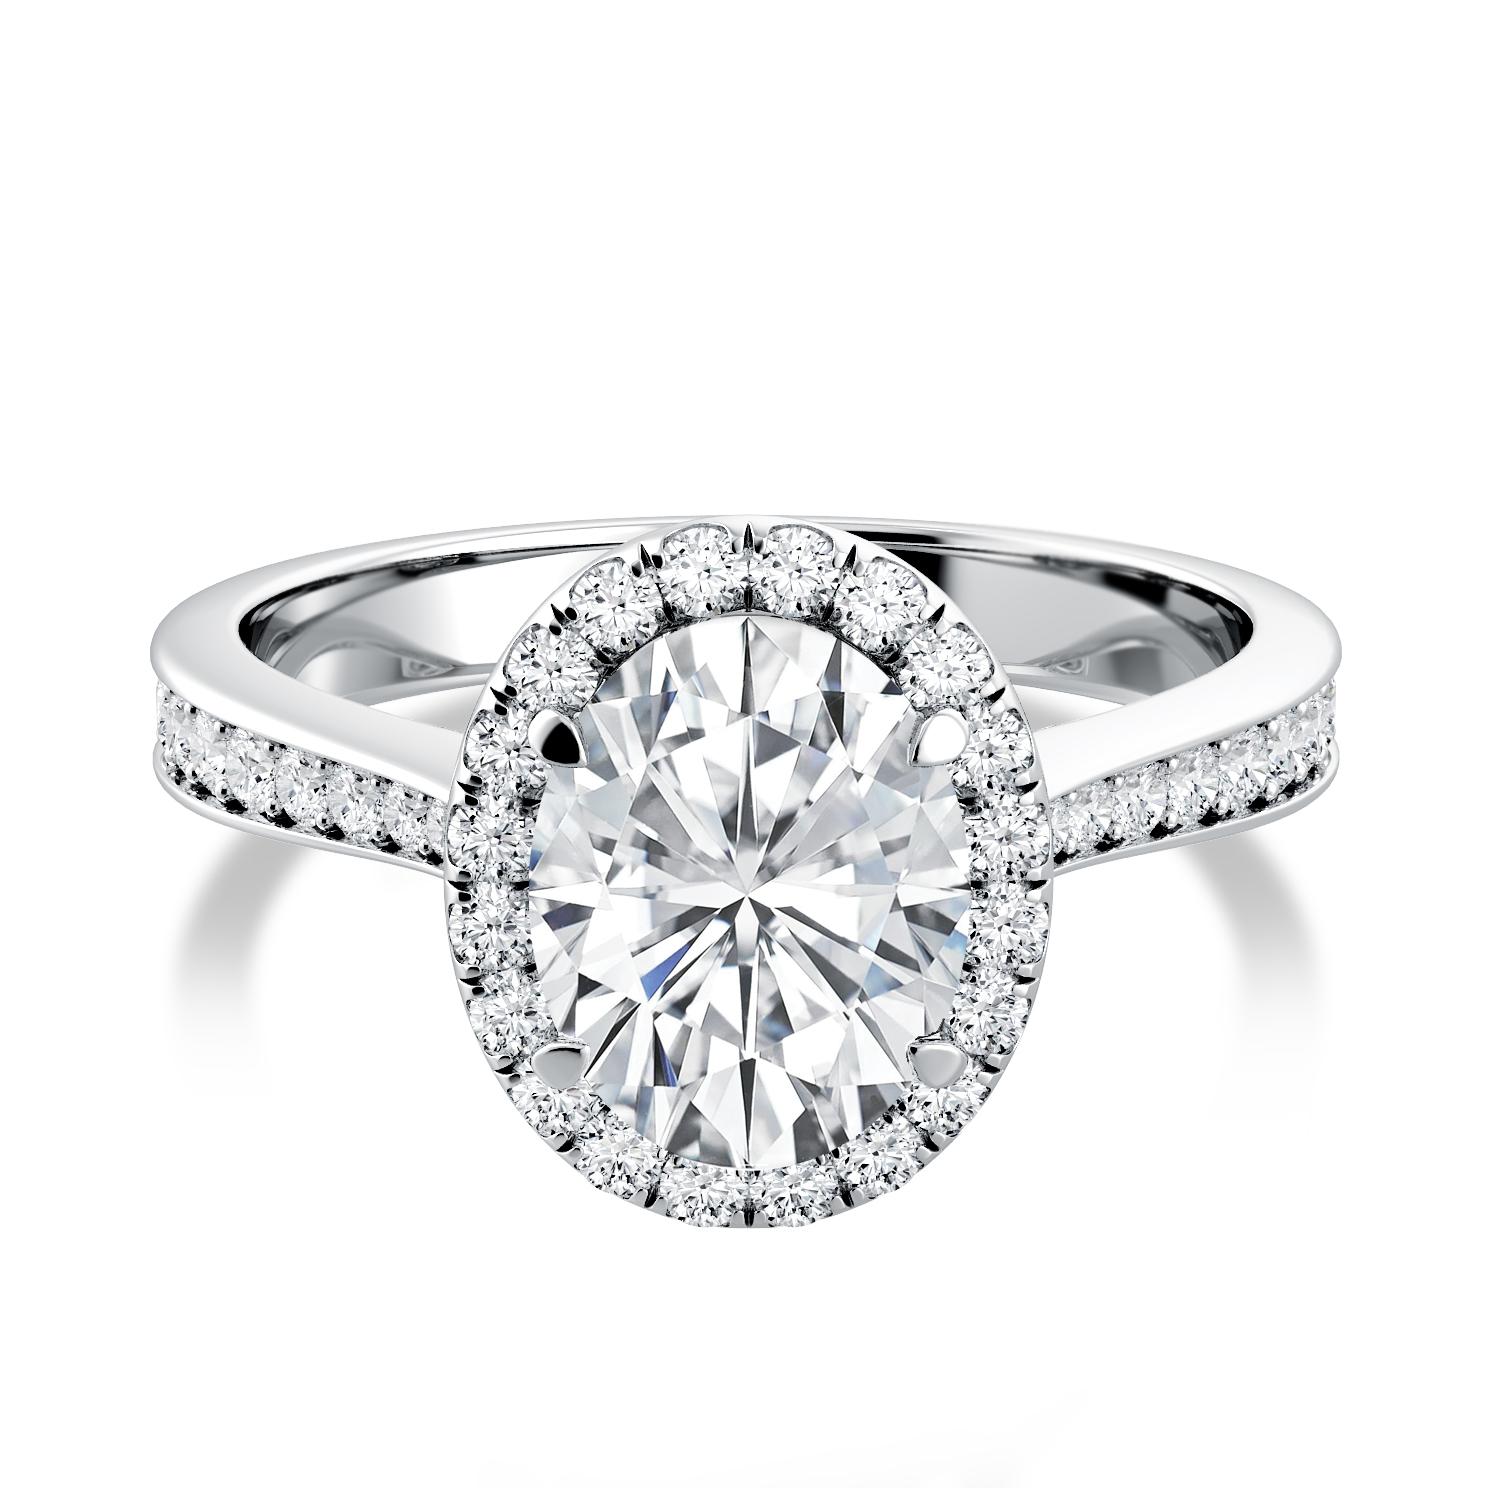 Center stone is 1 carat Oval cut GIA certified with the quality of D-VS mounted in platinum 950. 